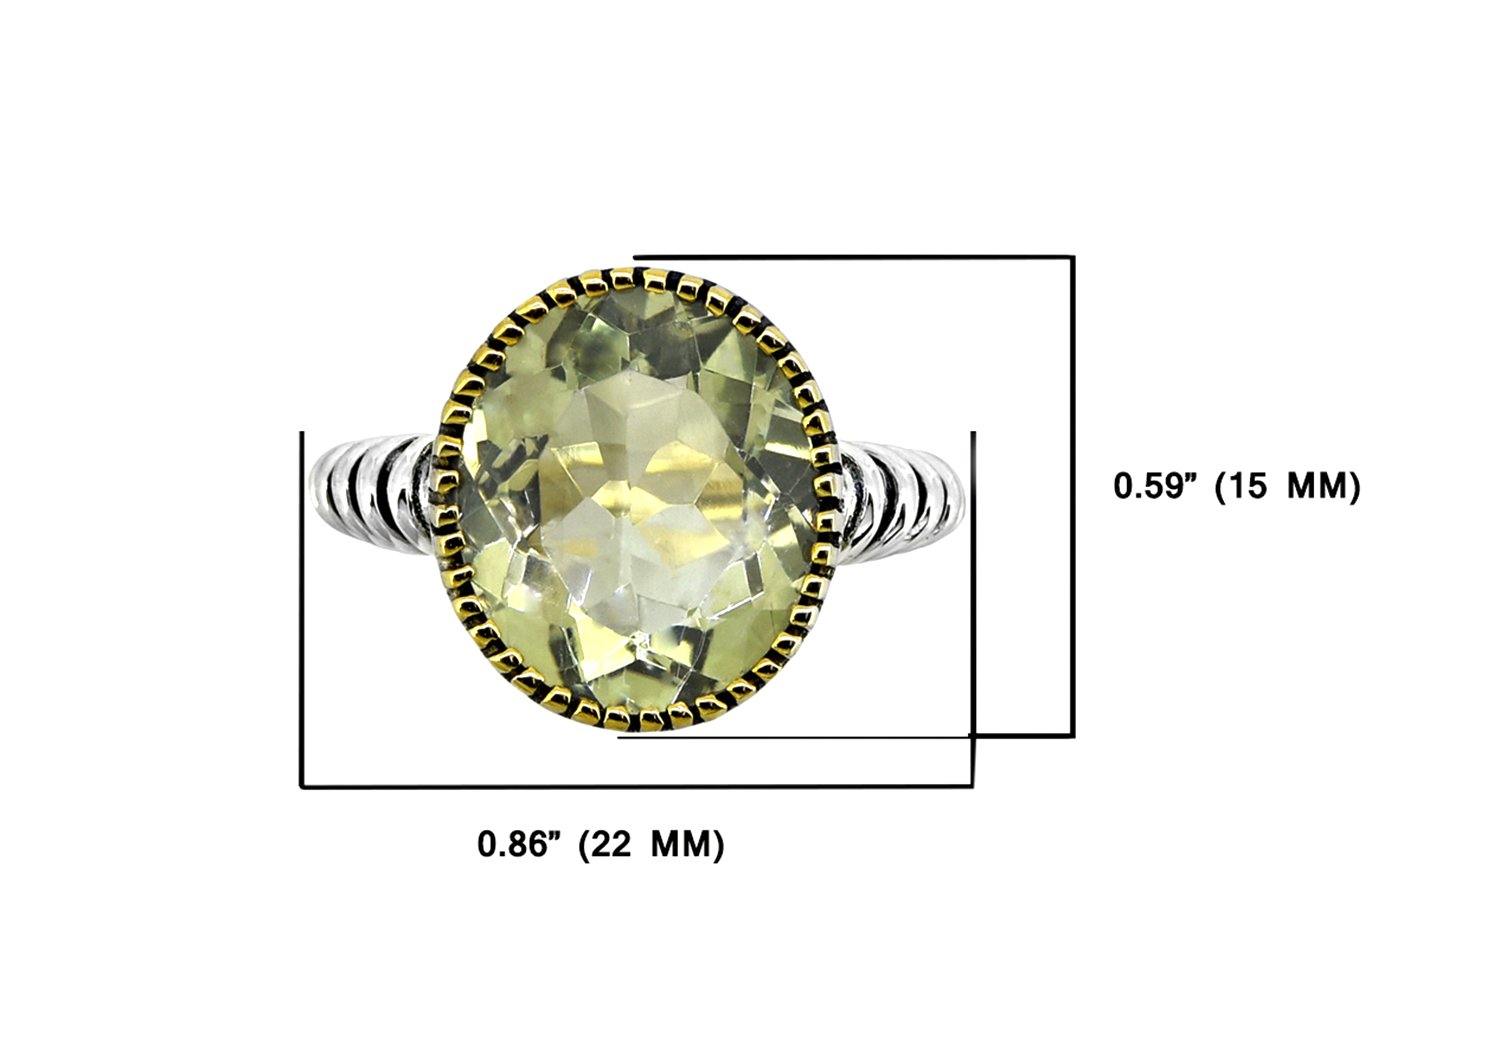 Green Amethyst Solid 925 Sterling Silver Gold Plated Ring Genuine Gemstone Jewelry - YoTreasure